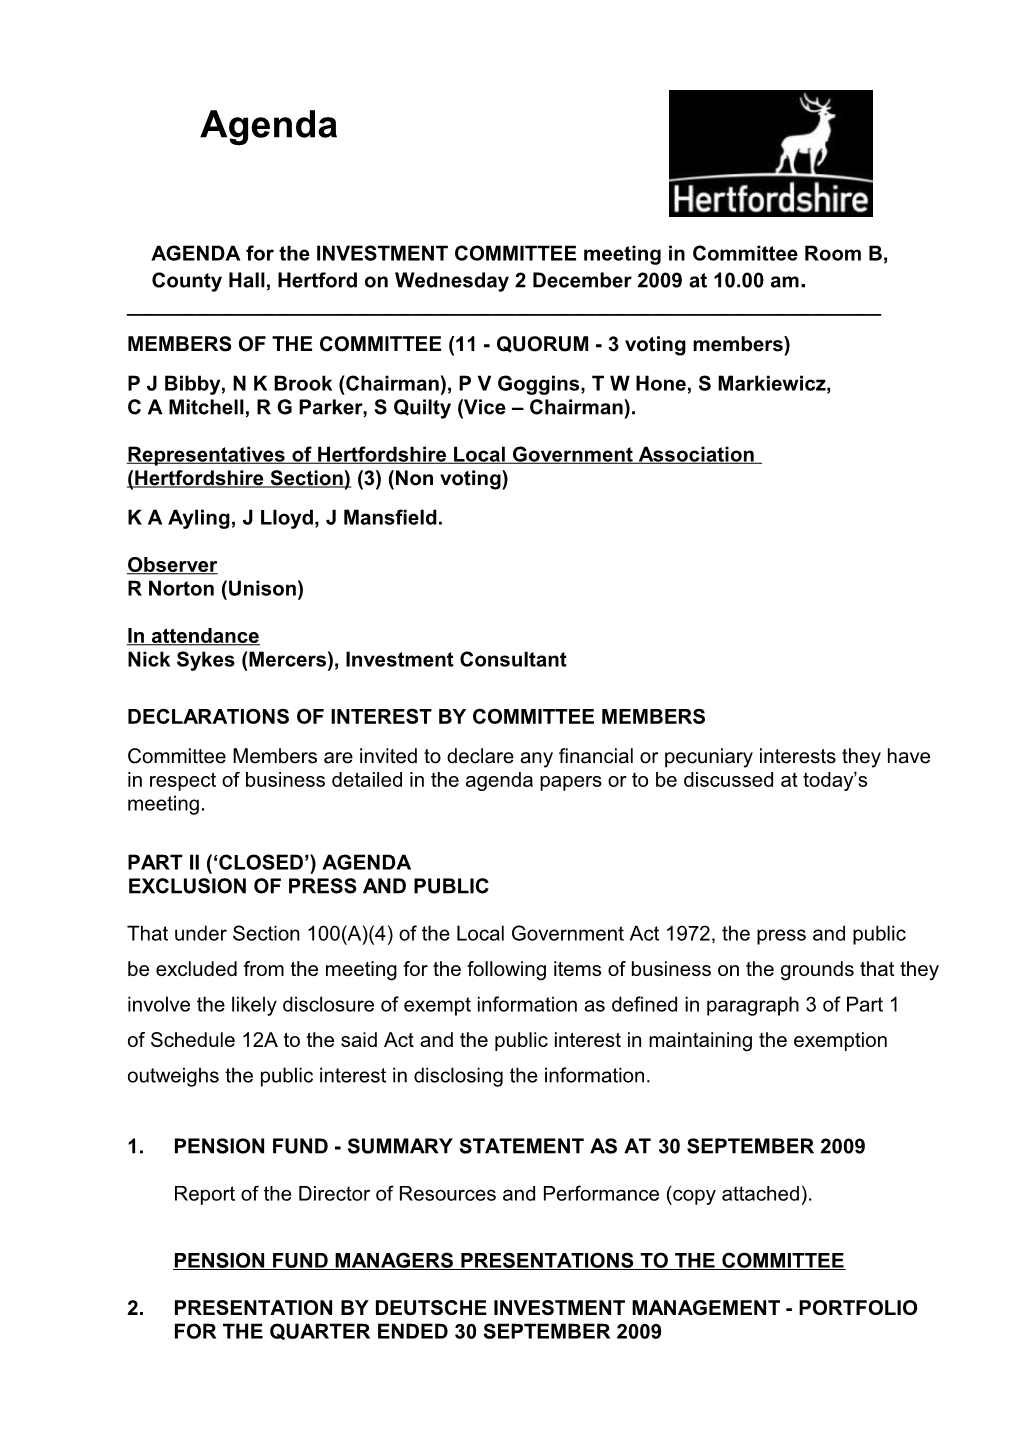 AGENDA for the INVESTMENT COMMITTEE Meeting in Committee Room B